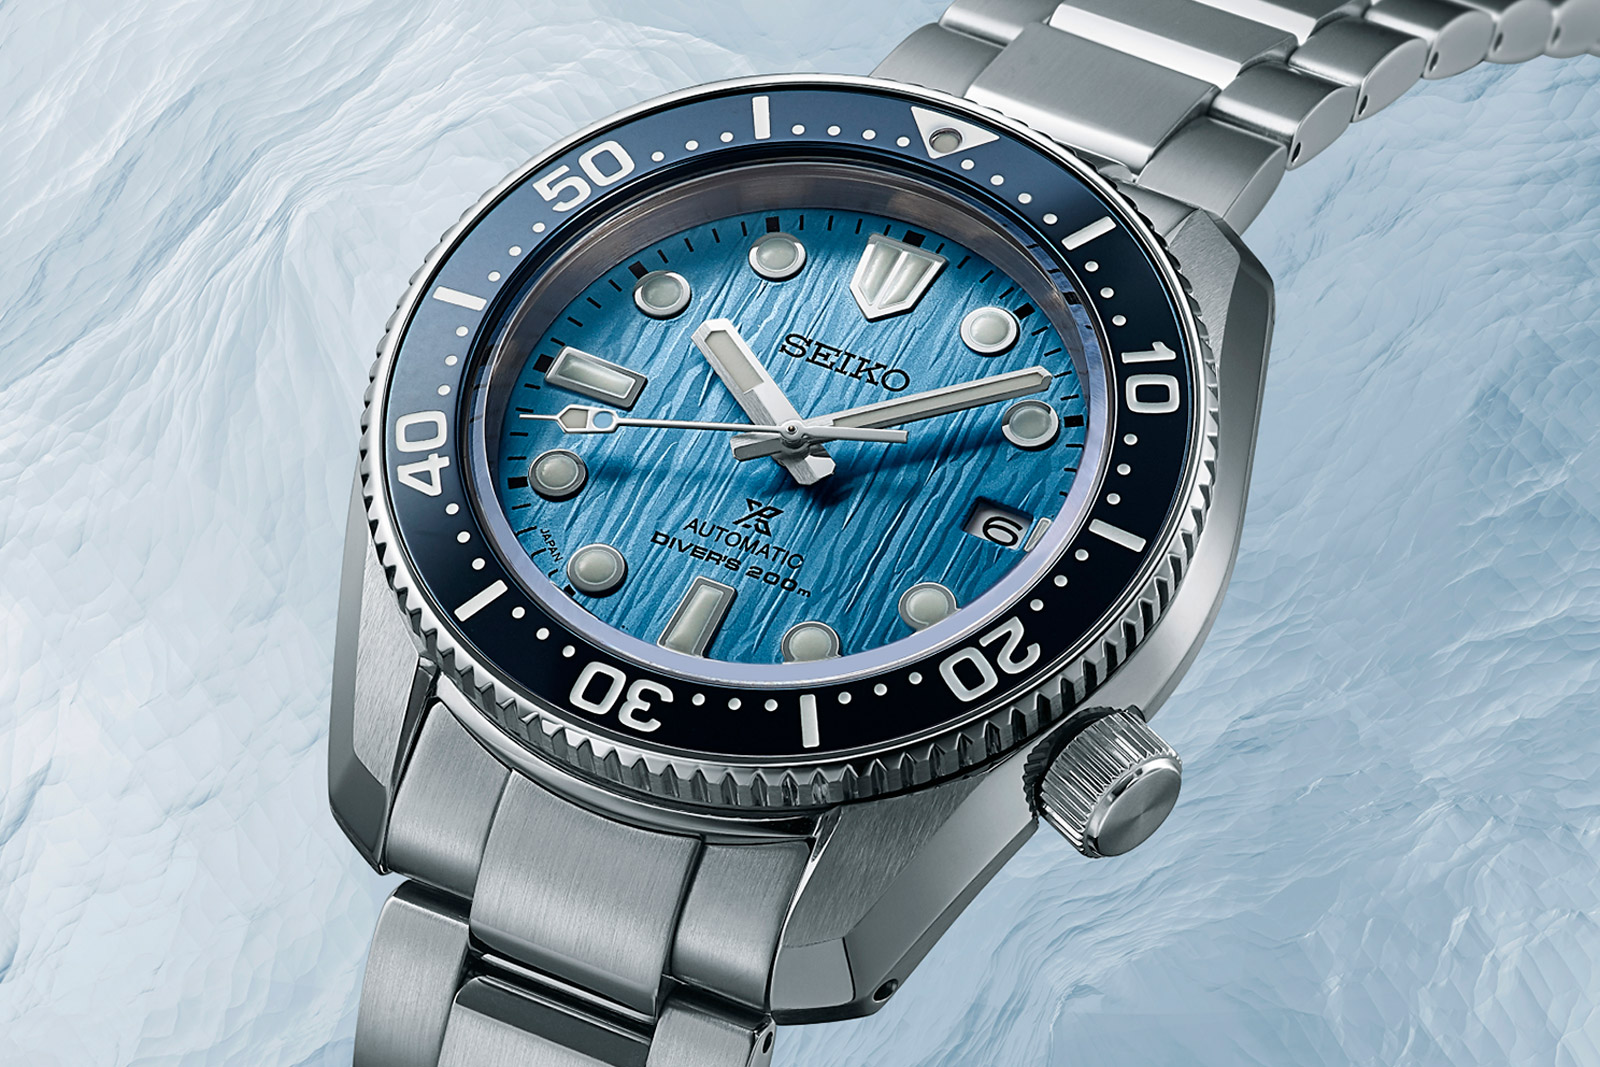 Seiko Debuts Prospex Dive Watches with “Glacial Ice” Dials | SJX Watches